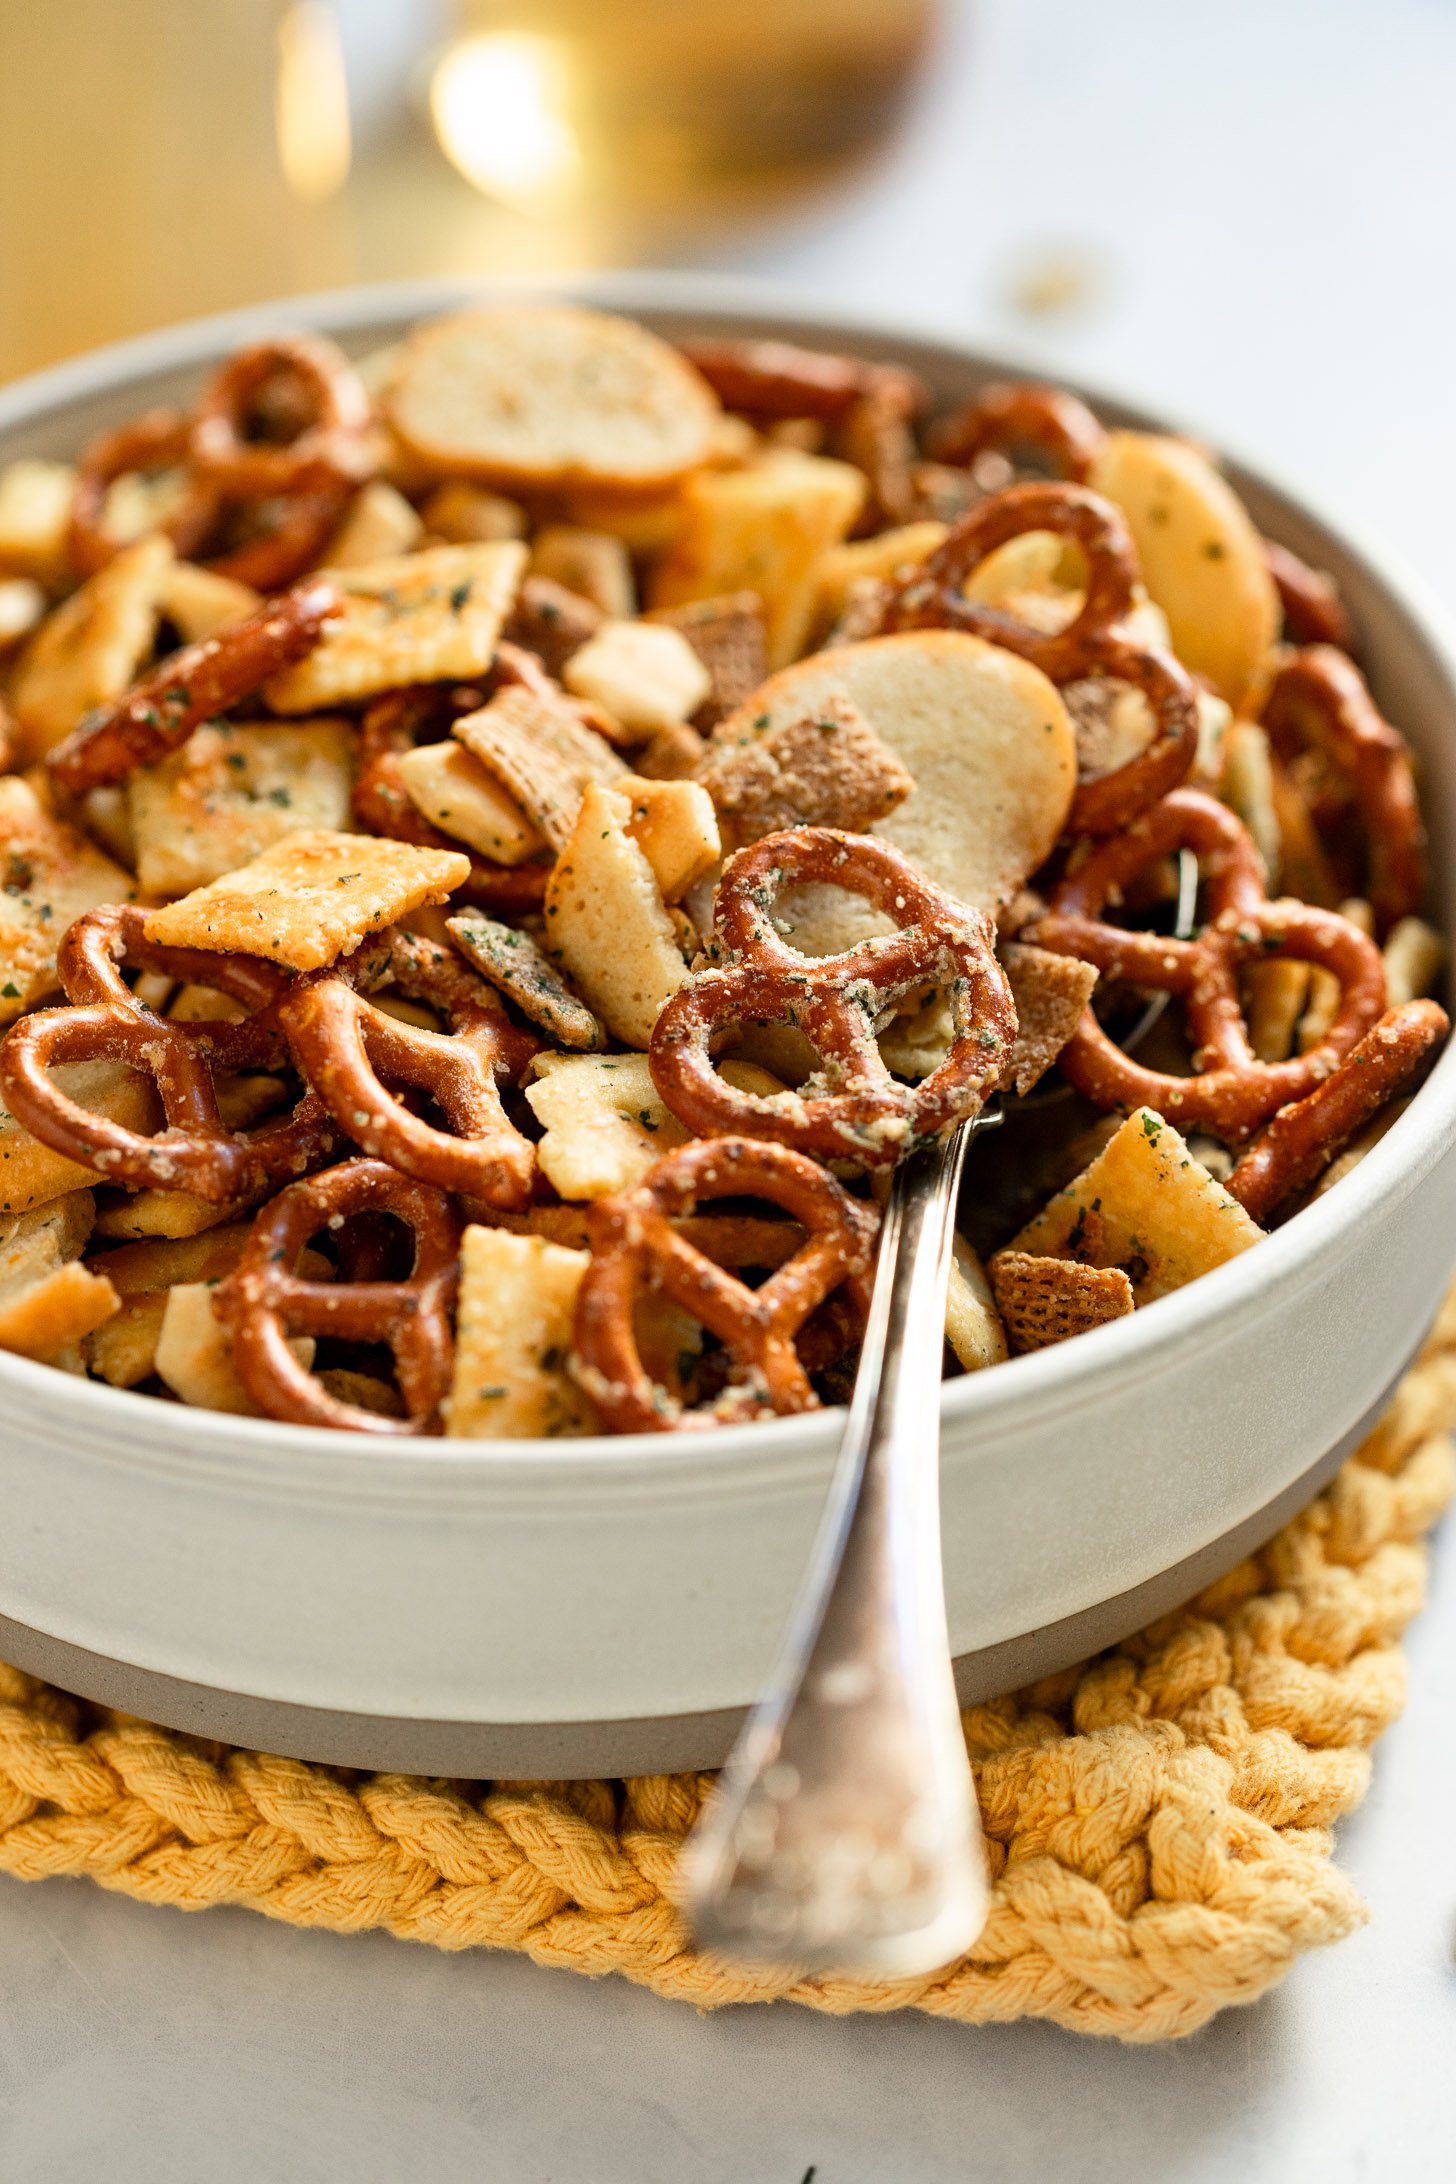 Side view of bowl of ranch snack mix.